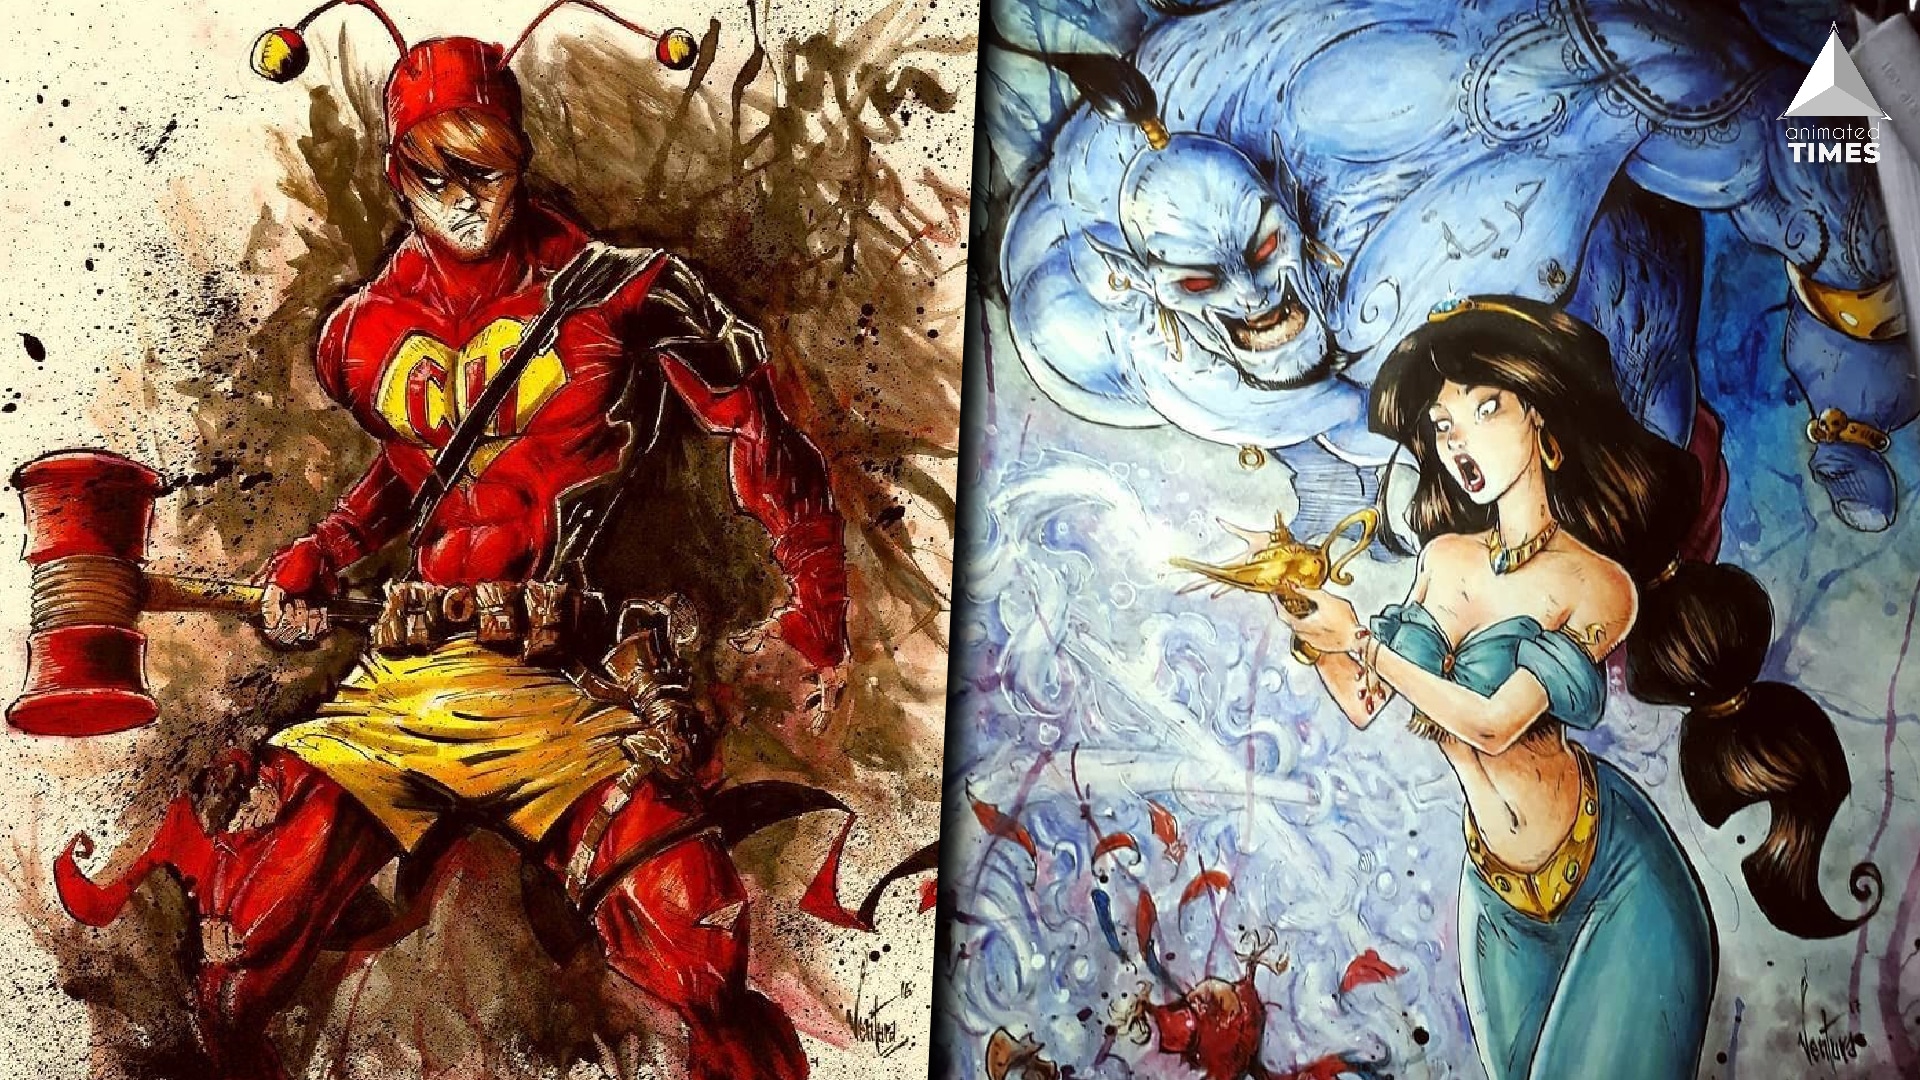 30 Absolutely Stellar PG-13 Fan Arts Of Your Favorite Shows & Movies -  Animated Times